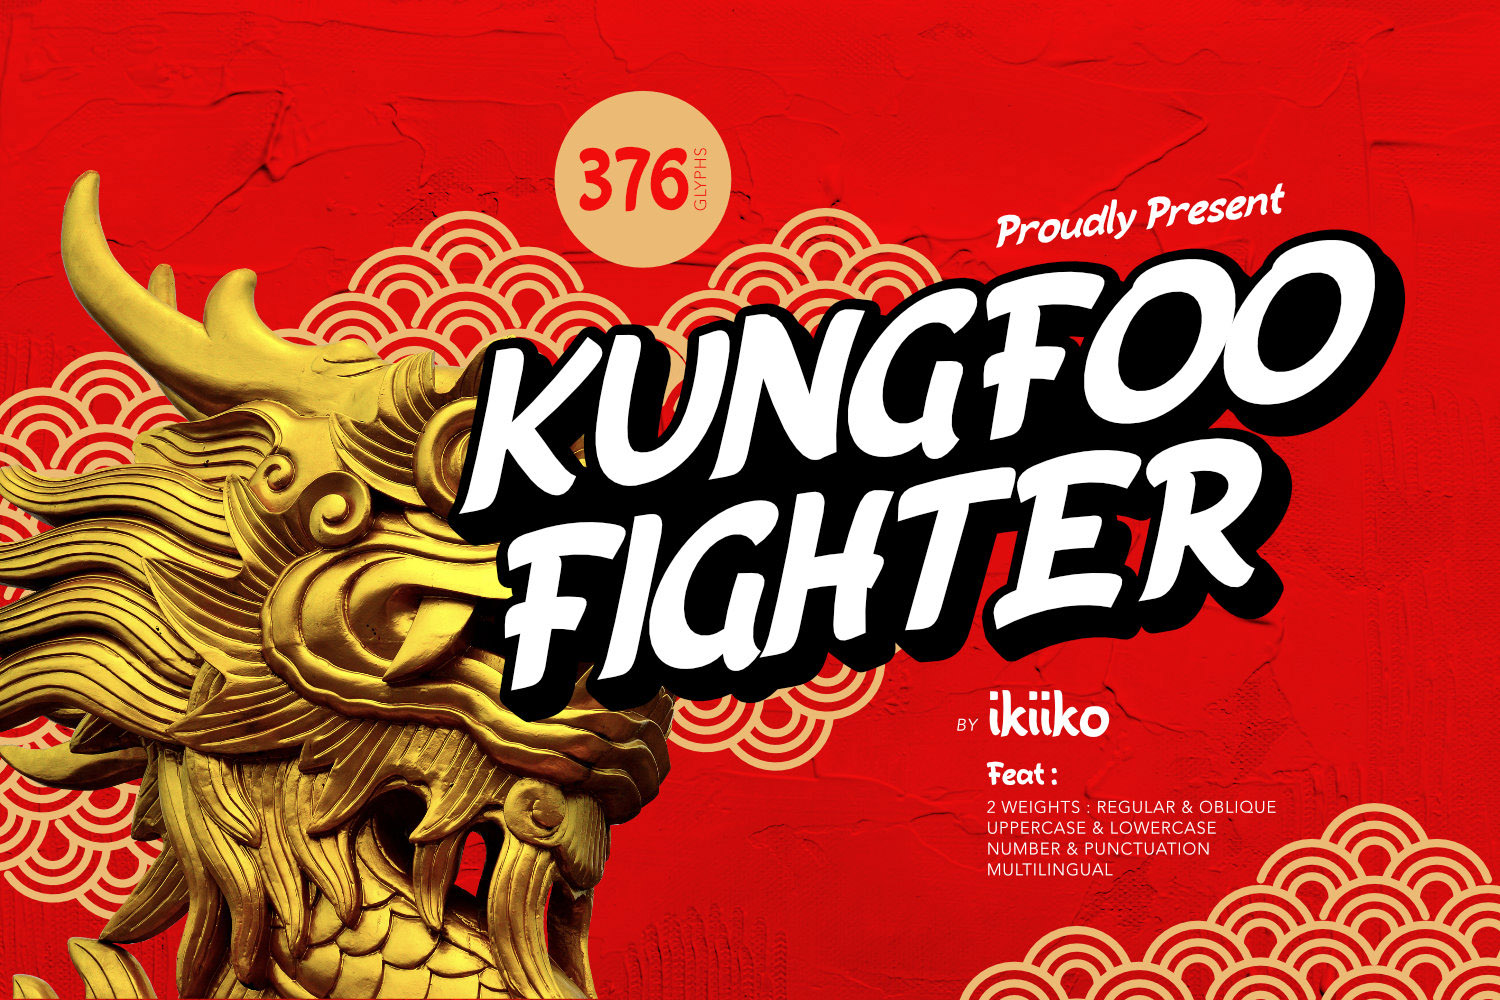 Kungfoo Fighter Free Font